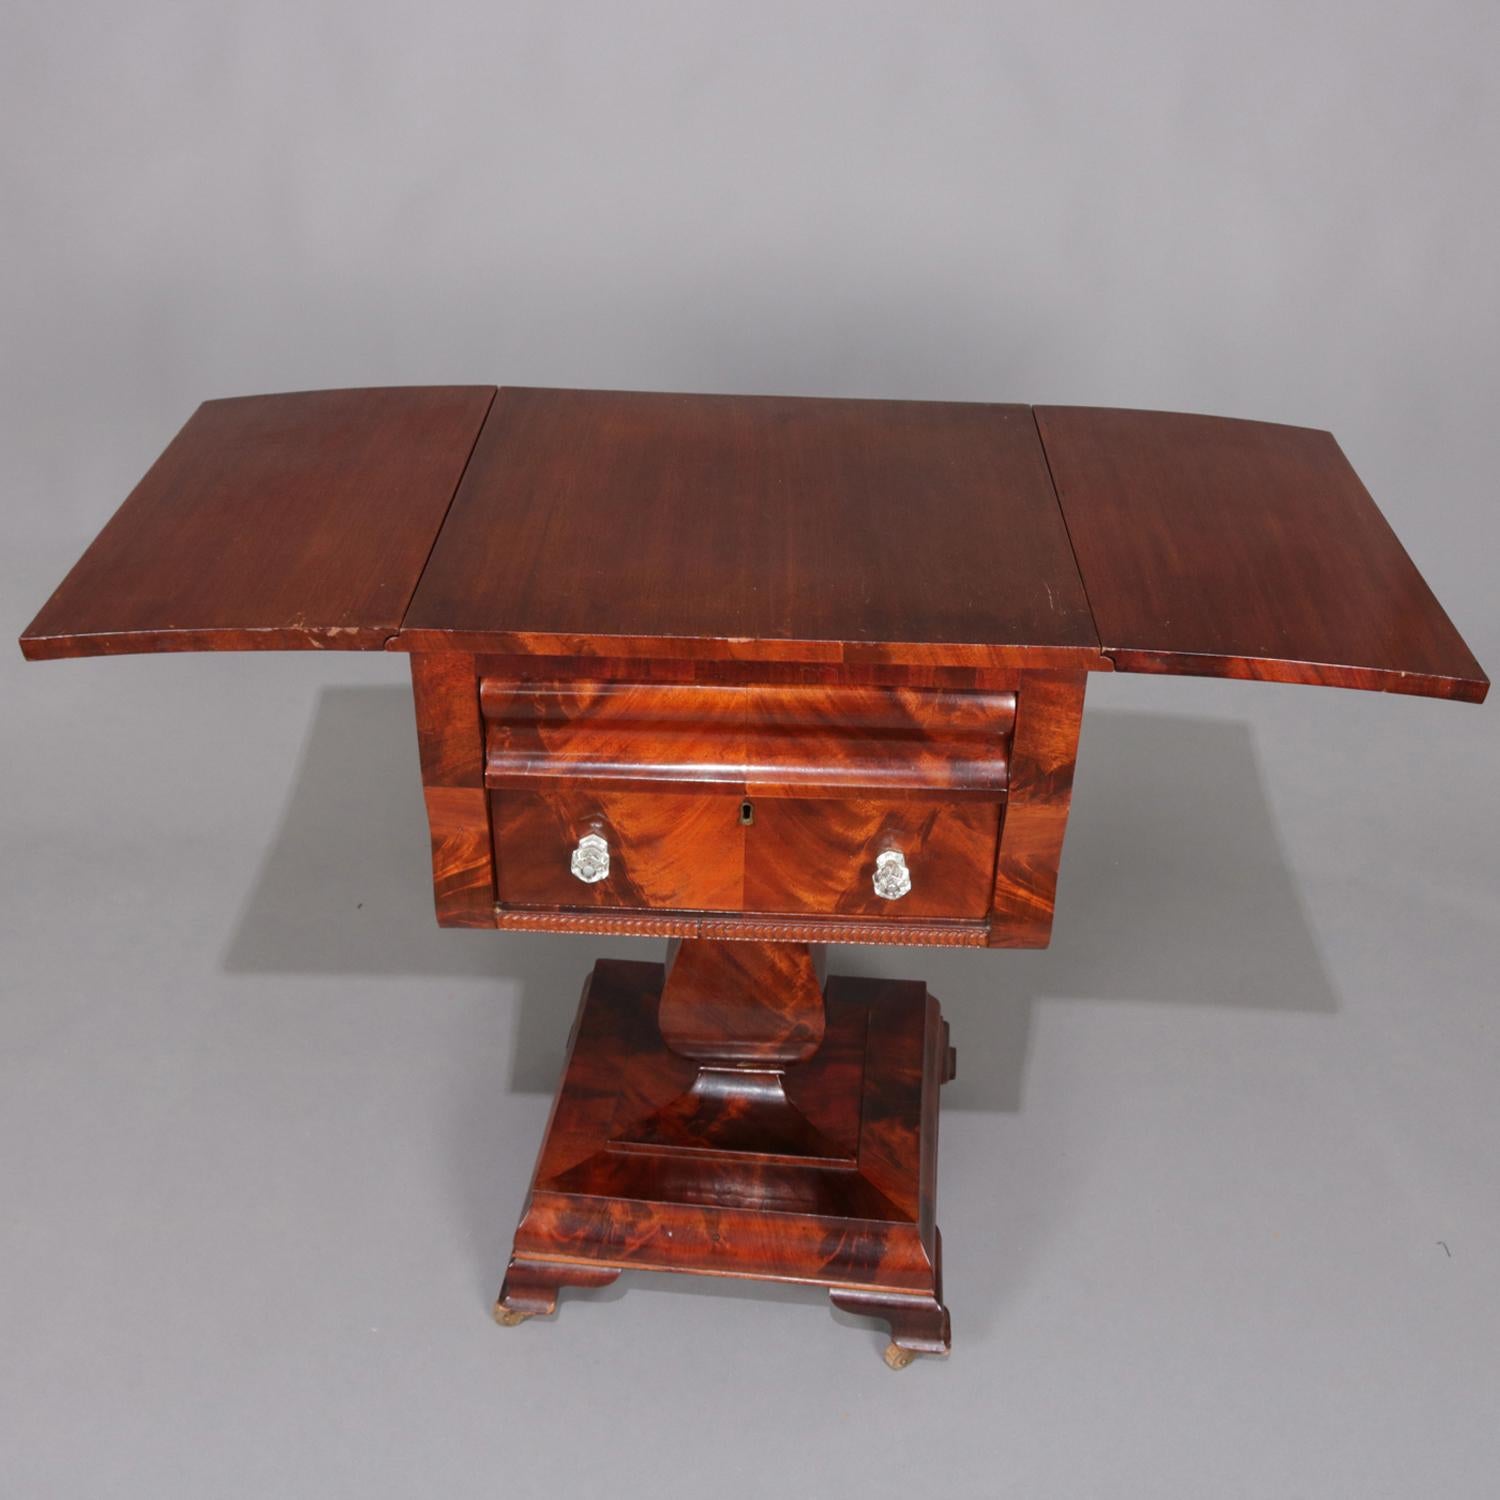 Antique American Empire Flame Mahogany Two-Drawer Drop-Leaf Sewing Stand 1